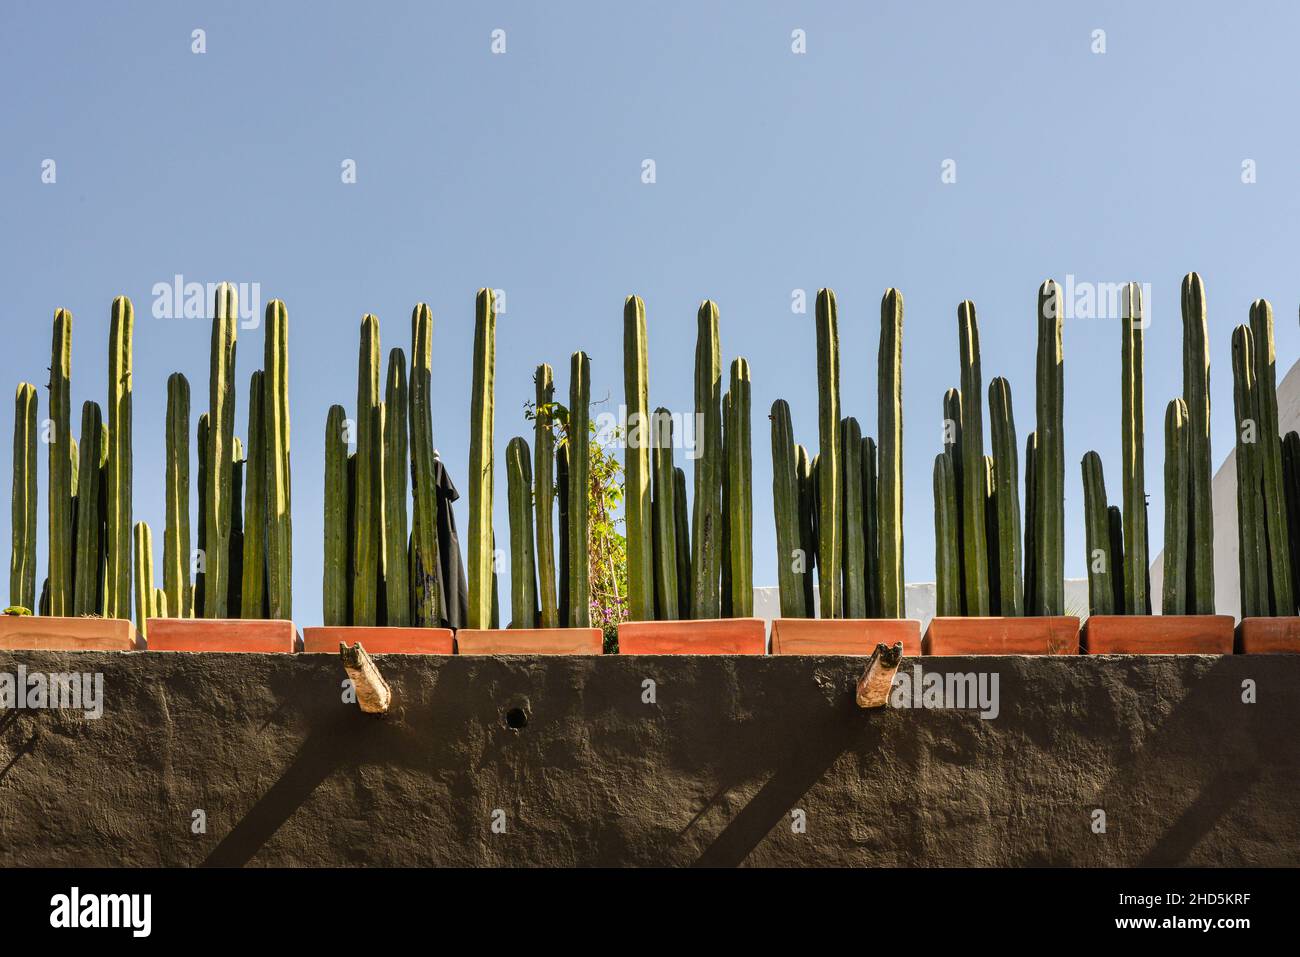 A strong horizontal view of a Mexican rooftop garden lined with potted Mexican Fencepost Cacti in a beautiful display against a blue sky in San Miguel Stock Photo